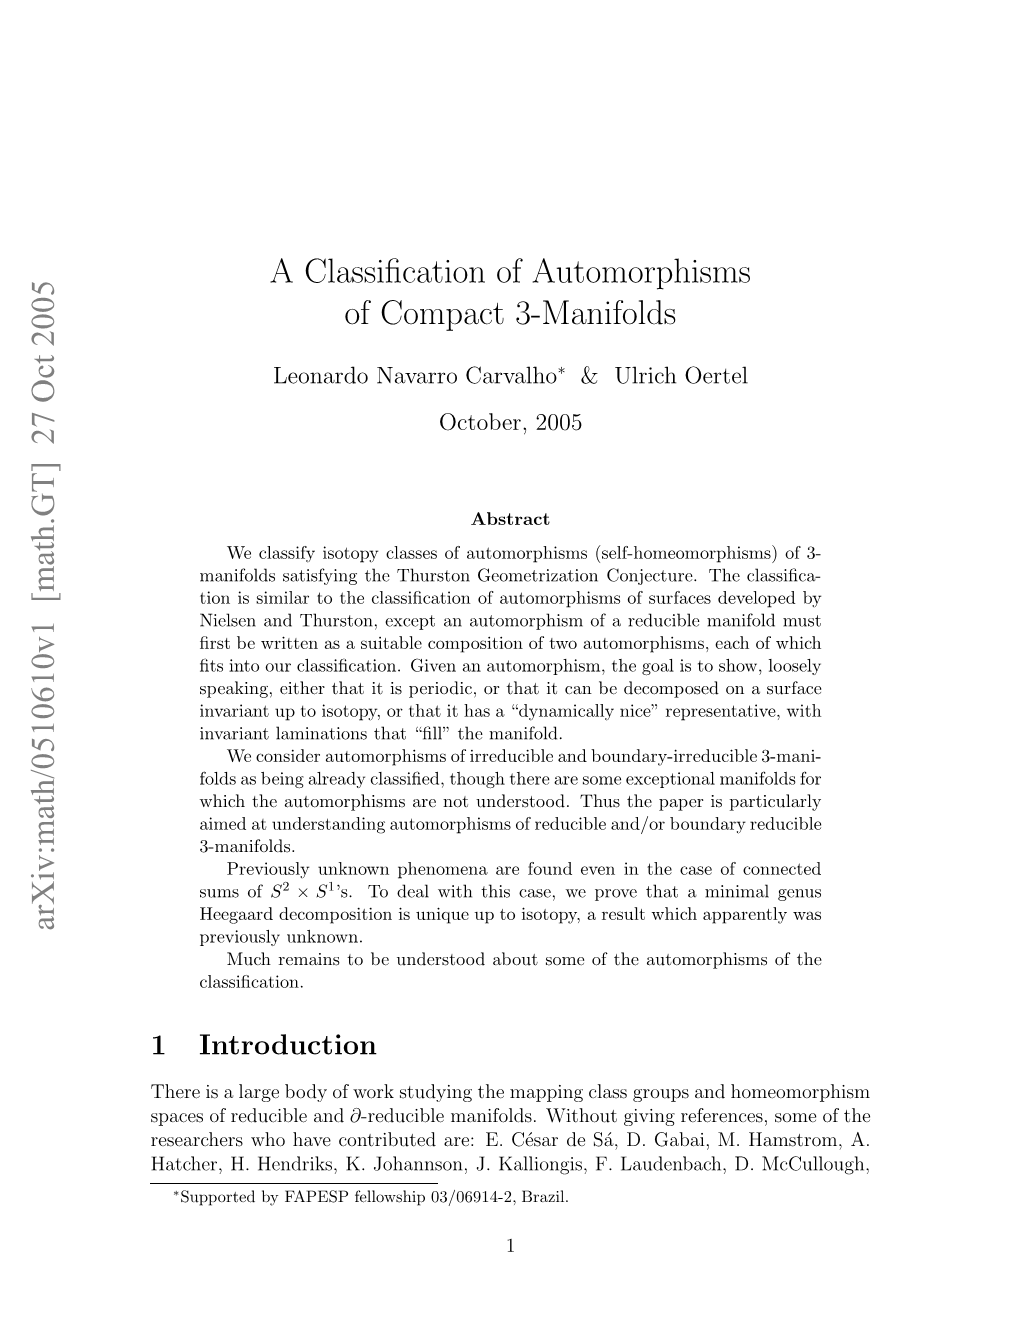 A Classification of Automorphisms of Compact 3-Manifolds